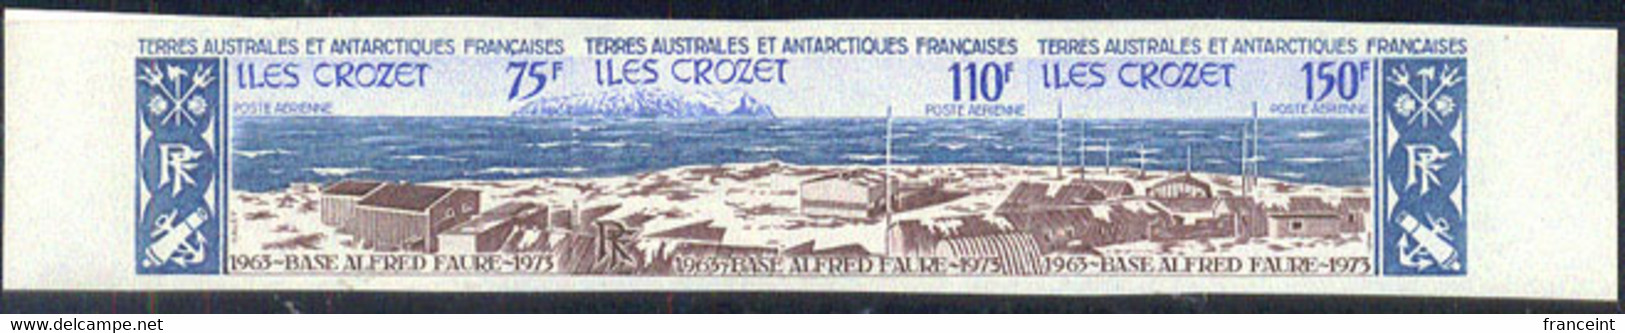 F.S.A.T.(1974) Panoramic View Of Alfred Fauré Base. Imperforate Triptych. Scott No C35a, Yvert No PA36a. - Imperforates, Proofs & Errors